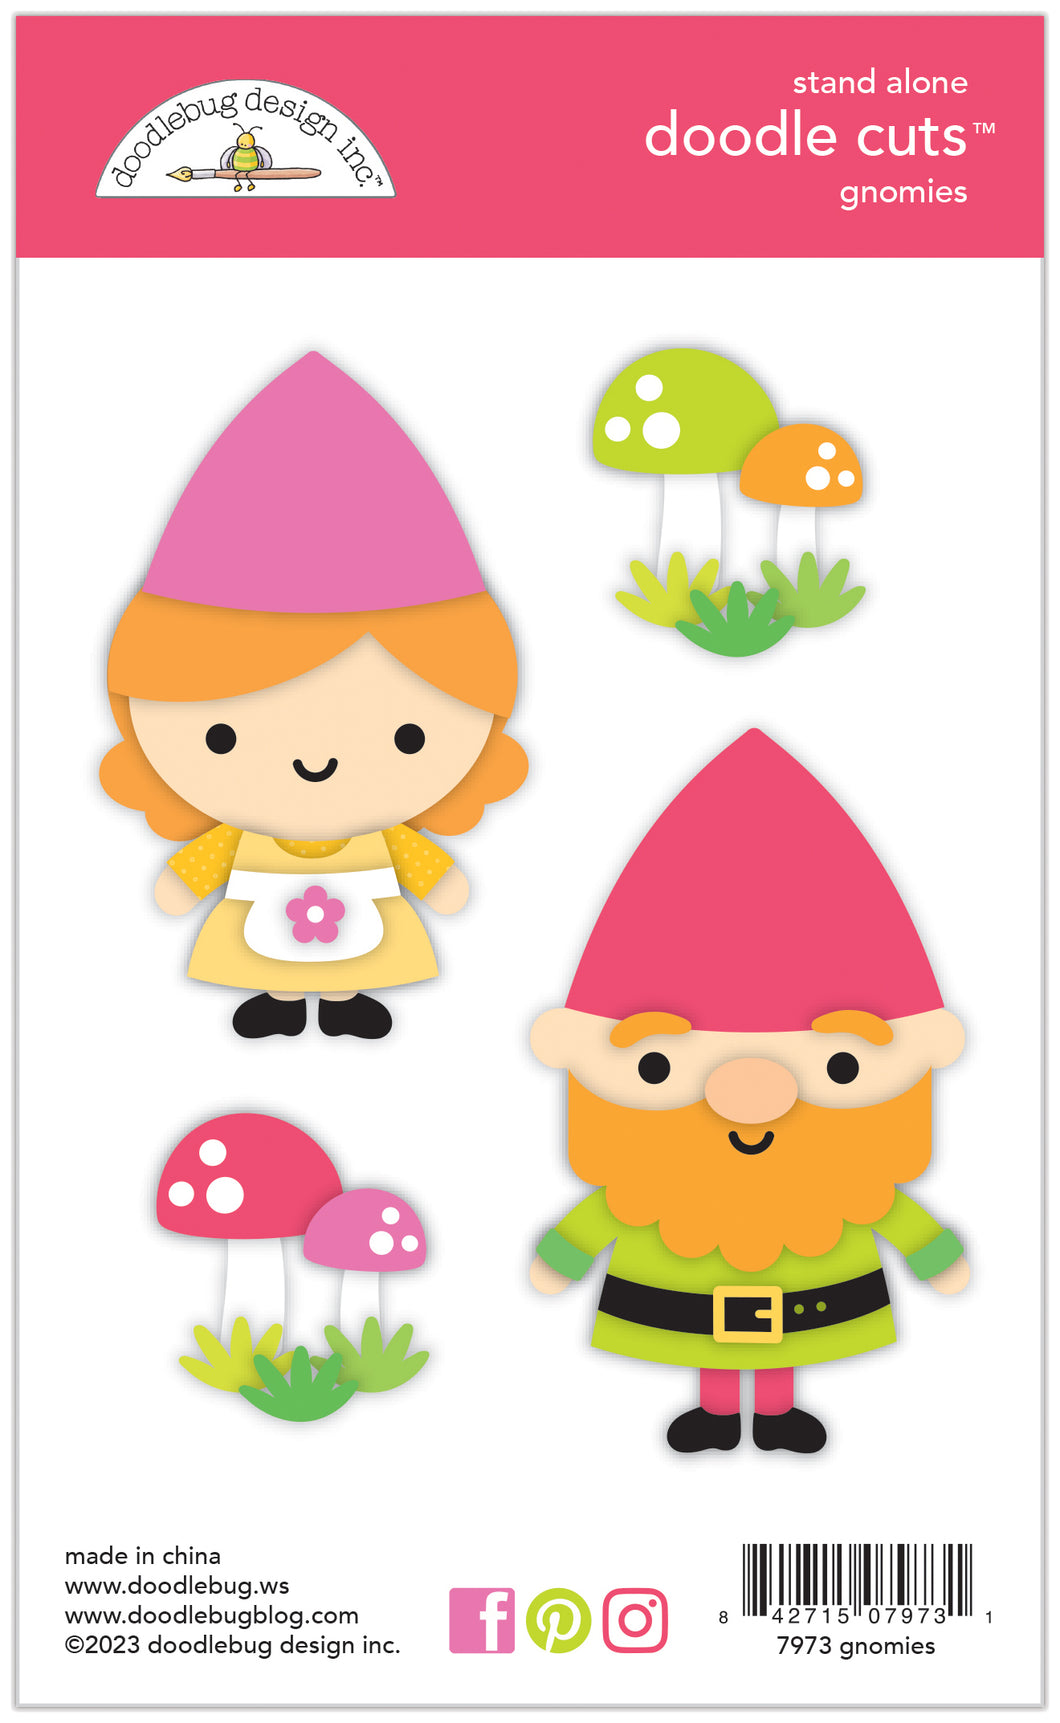 Doodlebug Over the Rainbow Gnomies Doodle Cuts